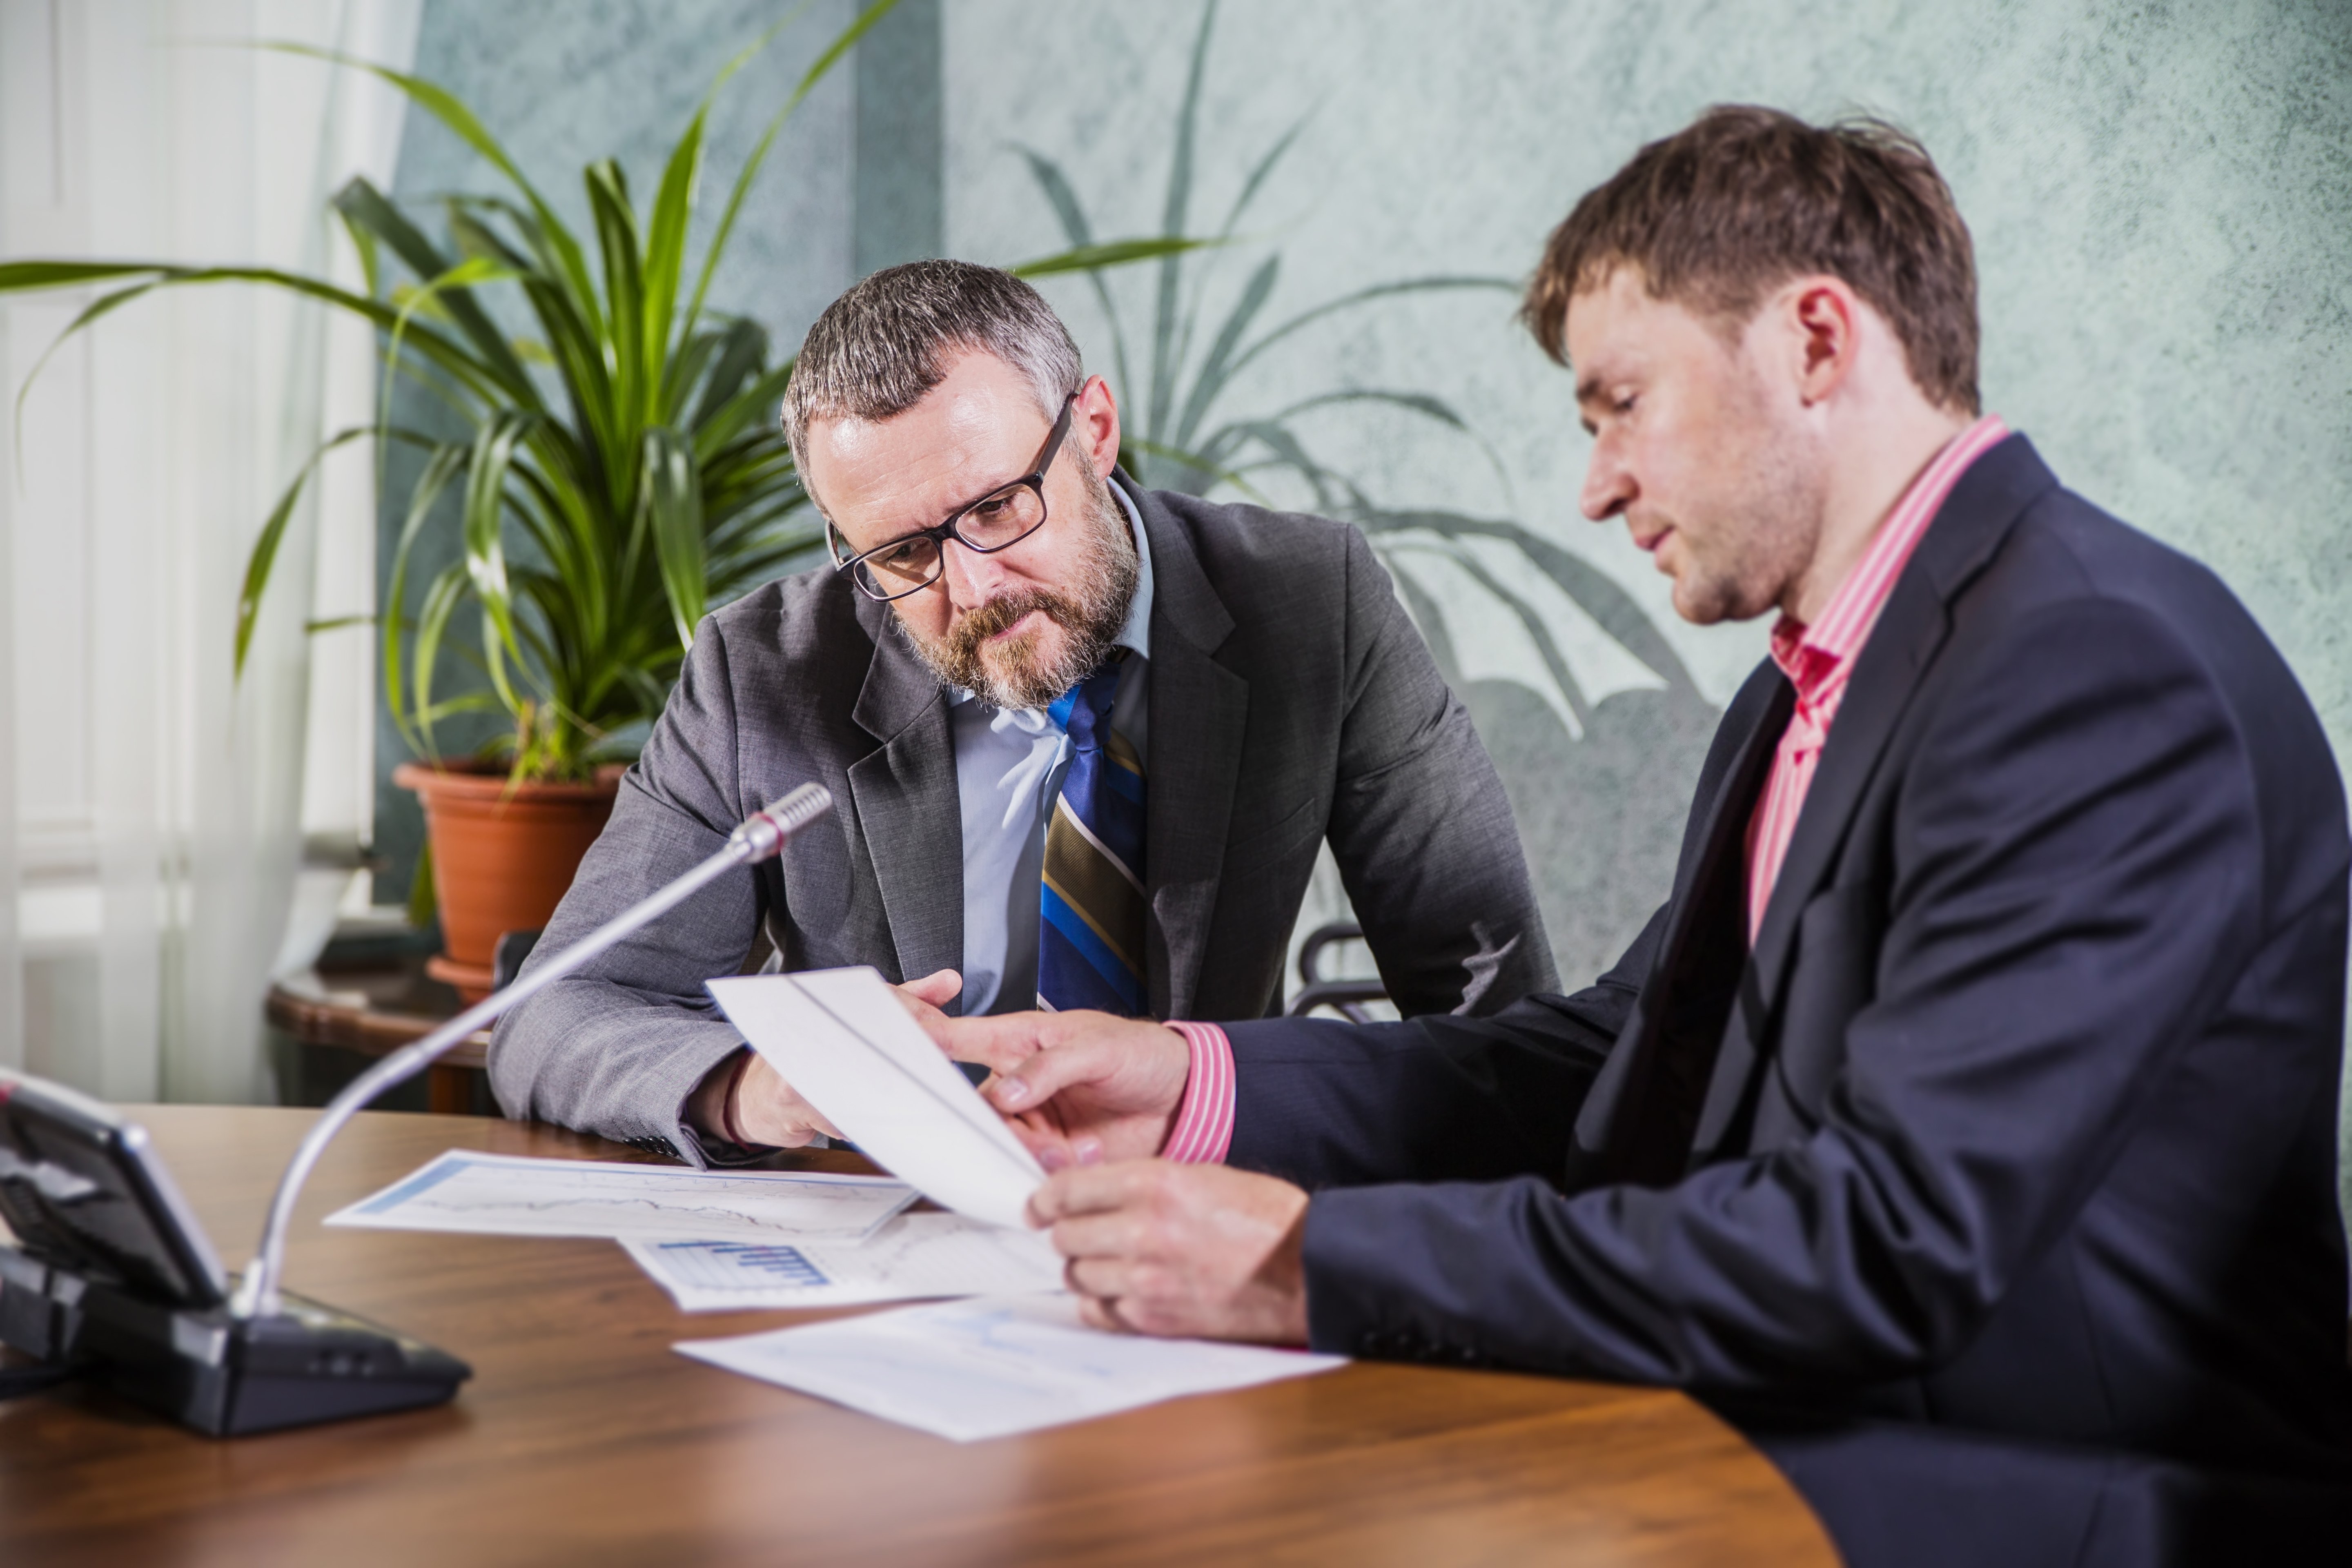 A man discussing legalities with a lawyer | Source: Shutterstock 